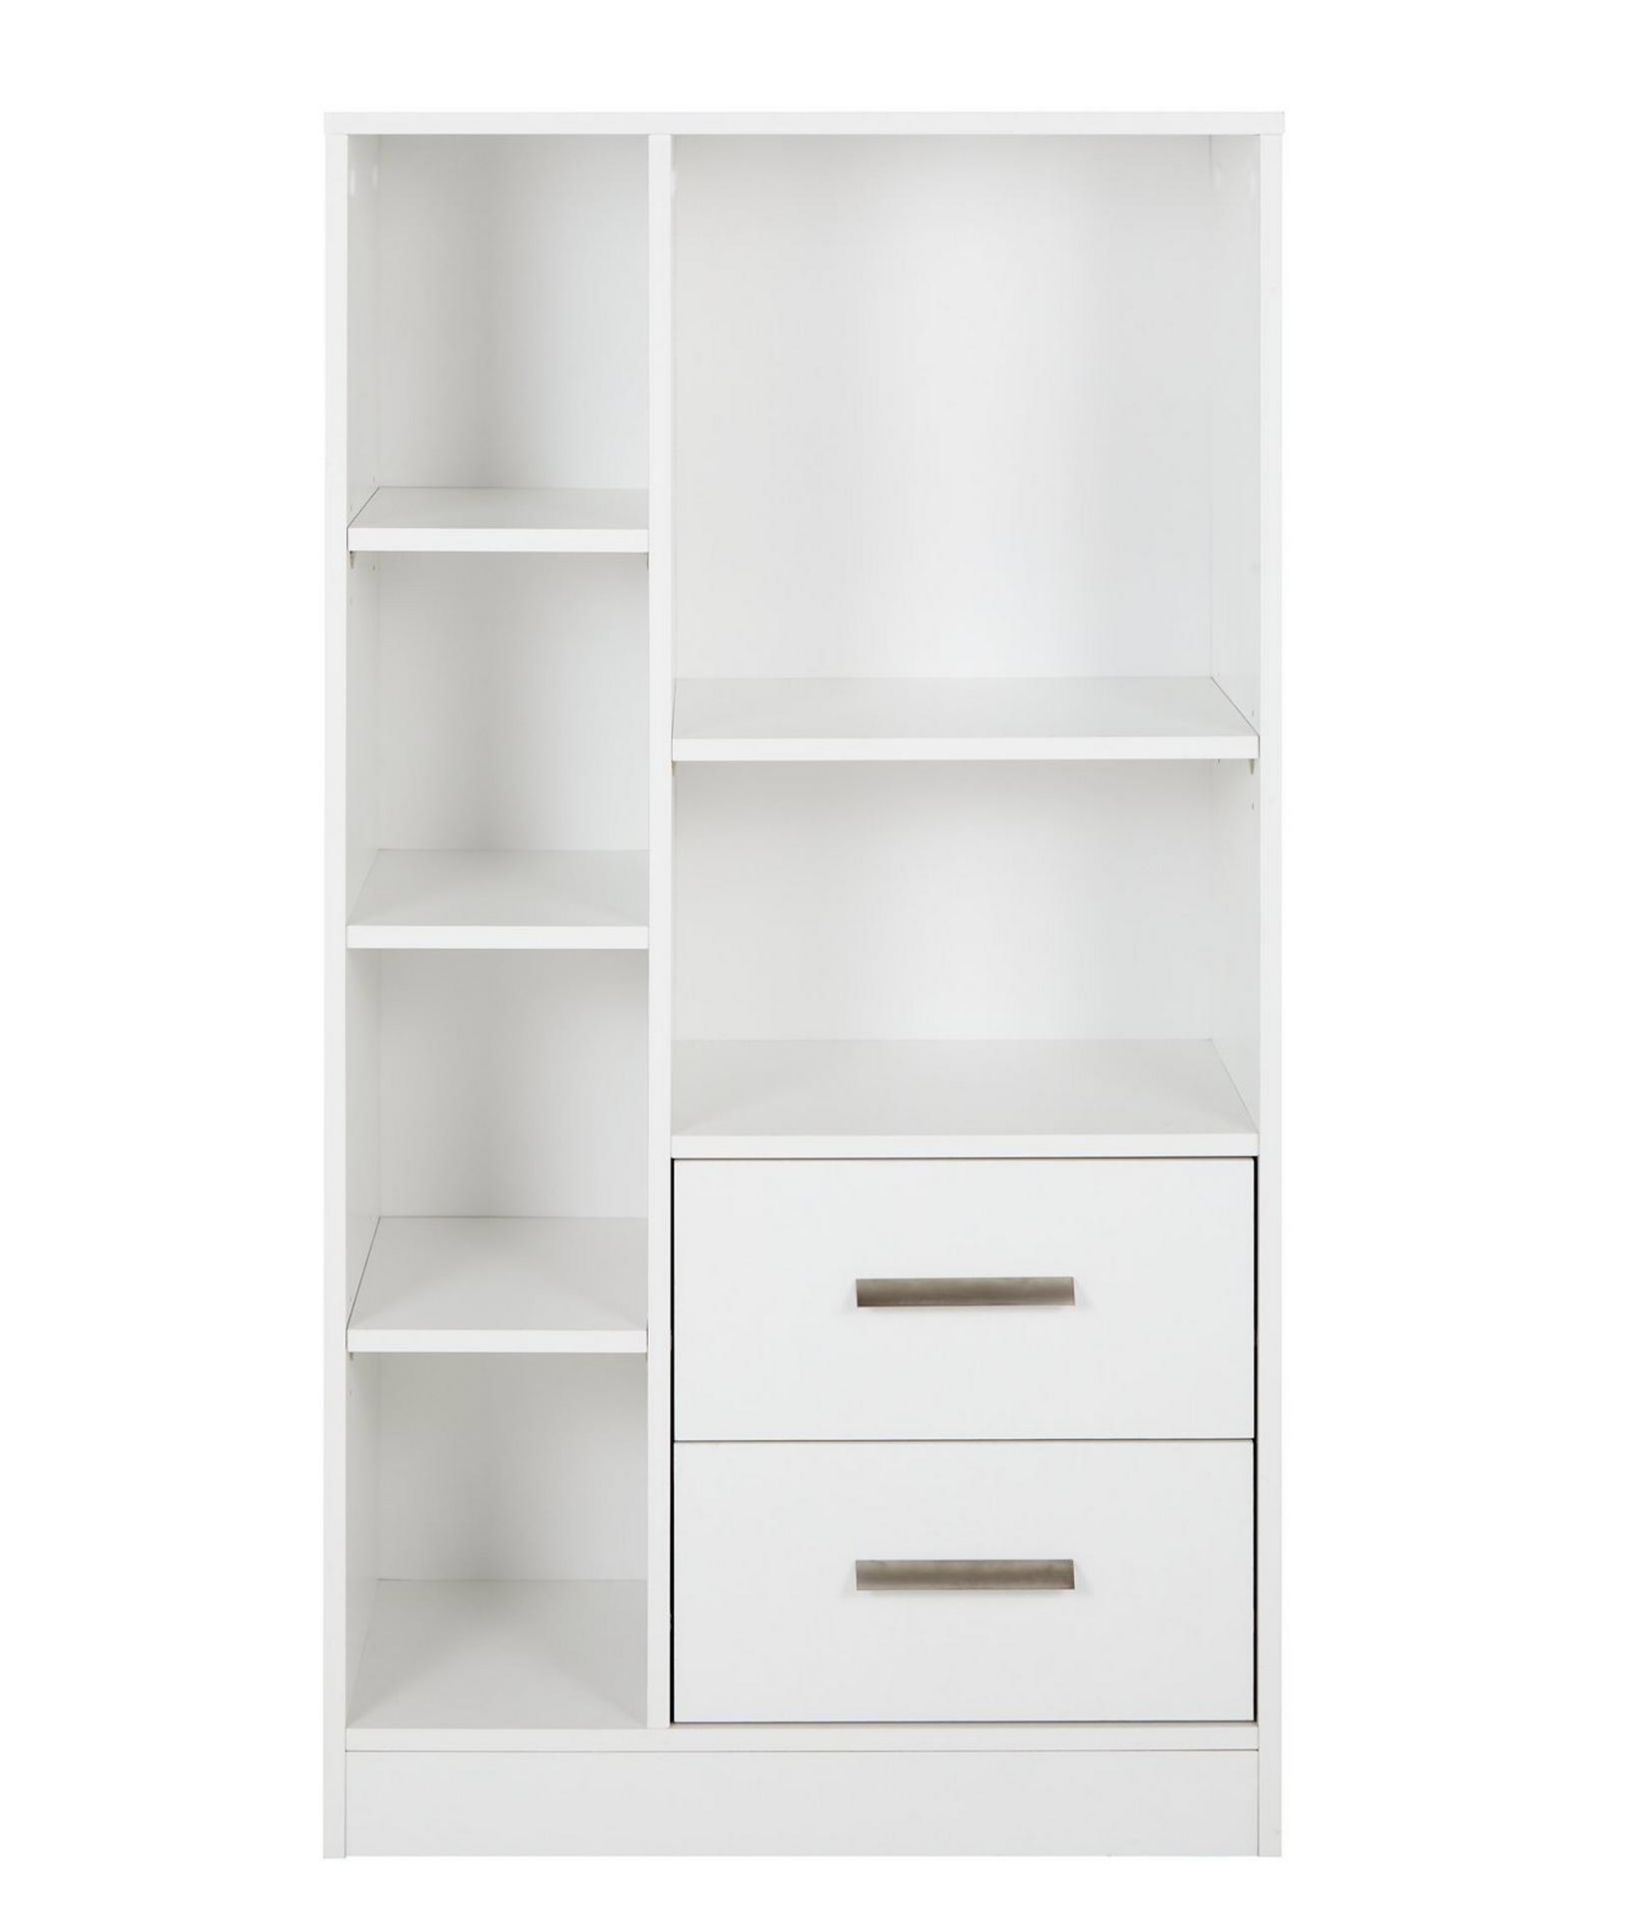 A1 PRODUCT NEW - METRO 3 PIECE STORGAGE BOOKCASE SET IN WHITE - RRP Ã‚Â£189 - Image 3 of 5